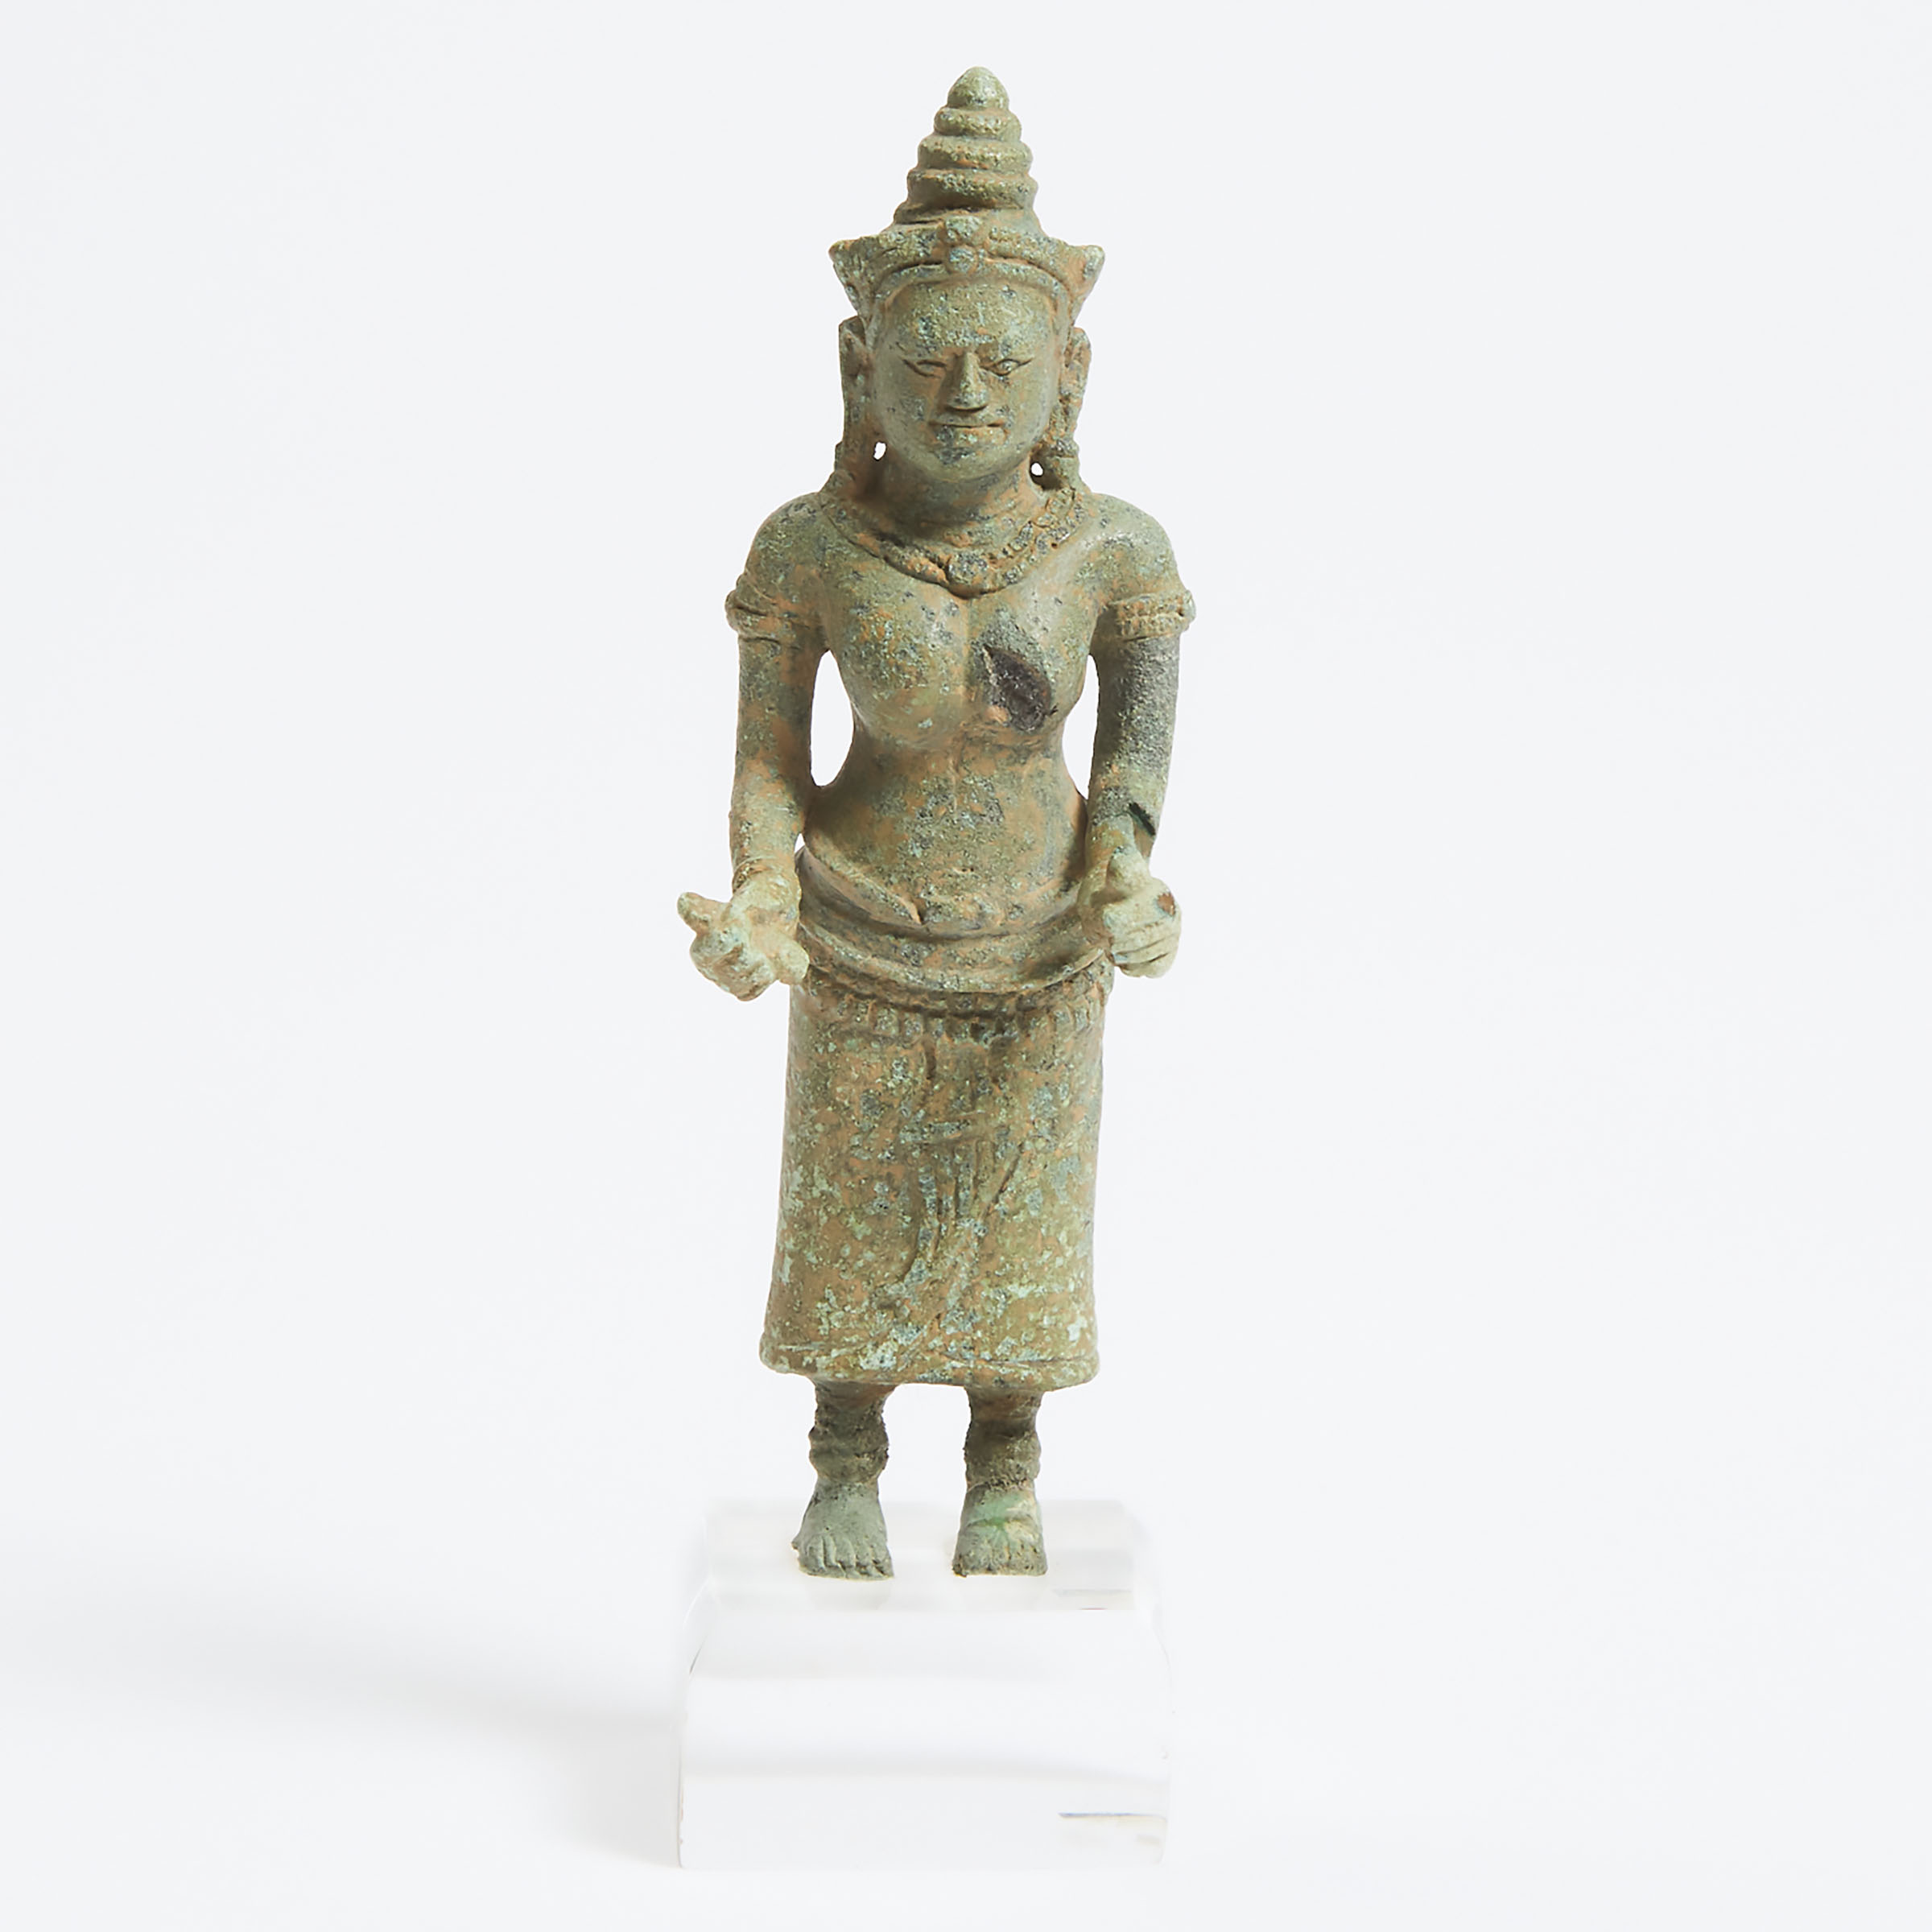 A Small Thai Bronze Figure of a